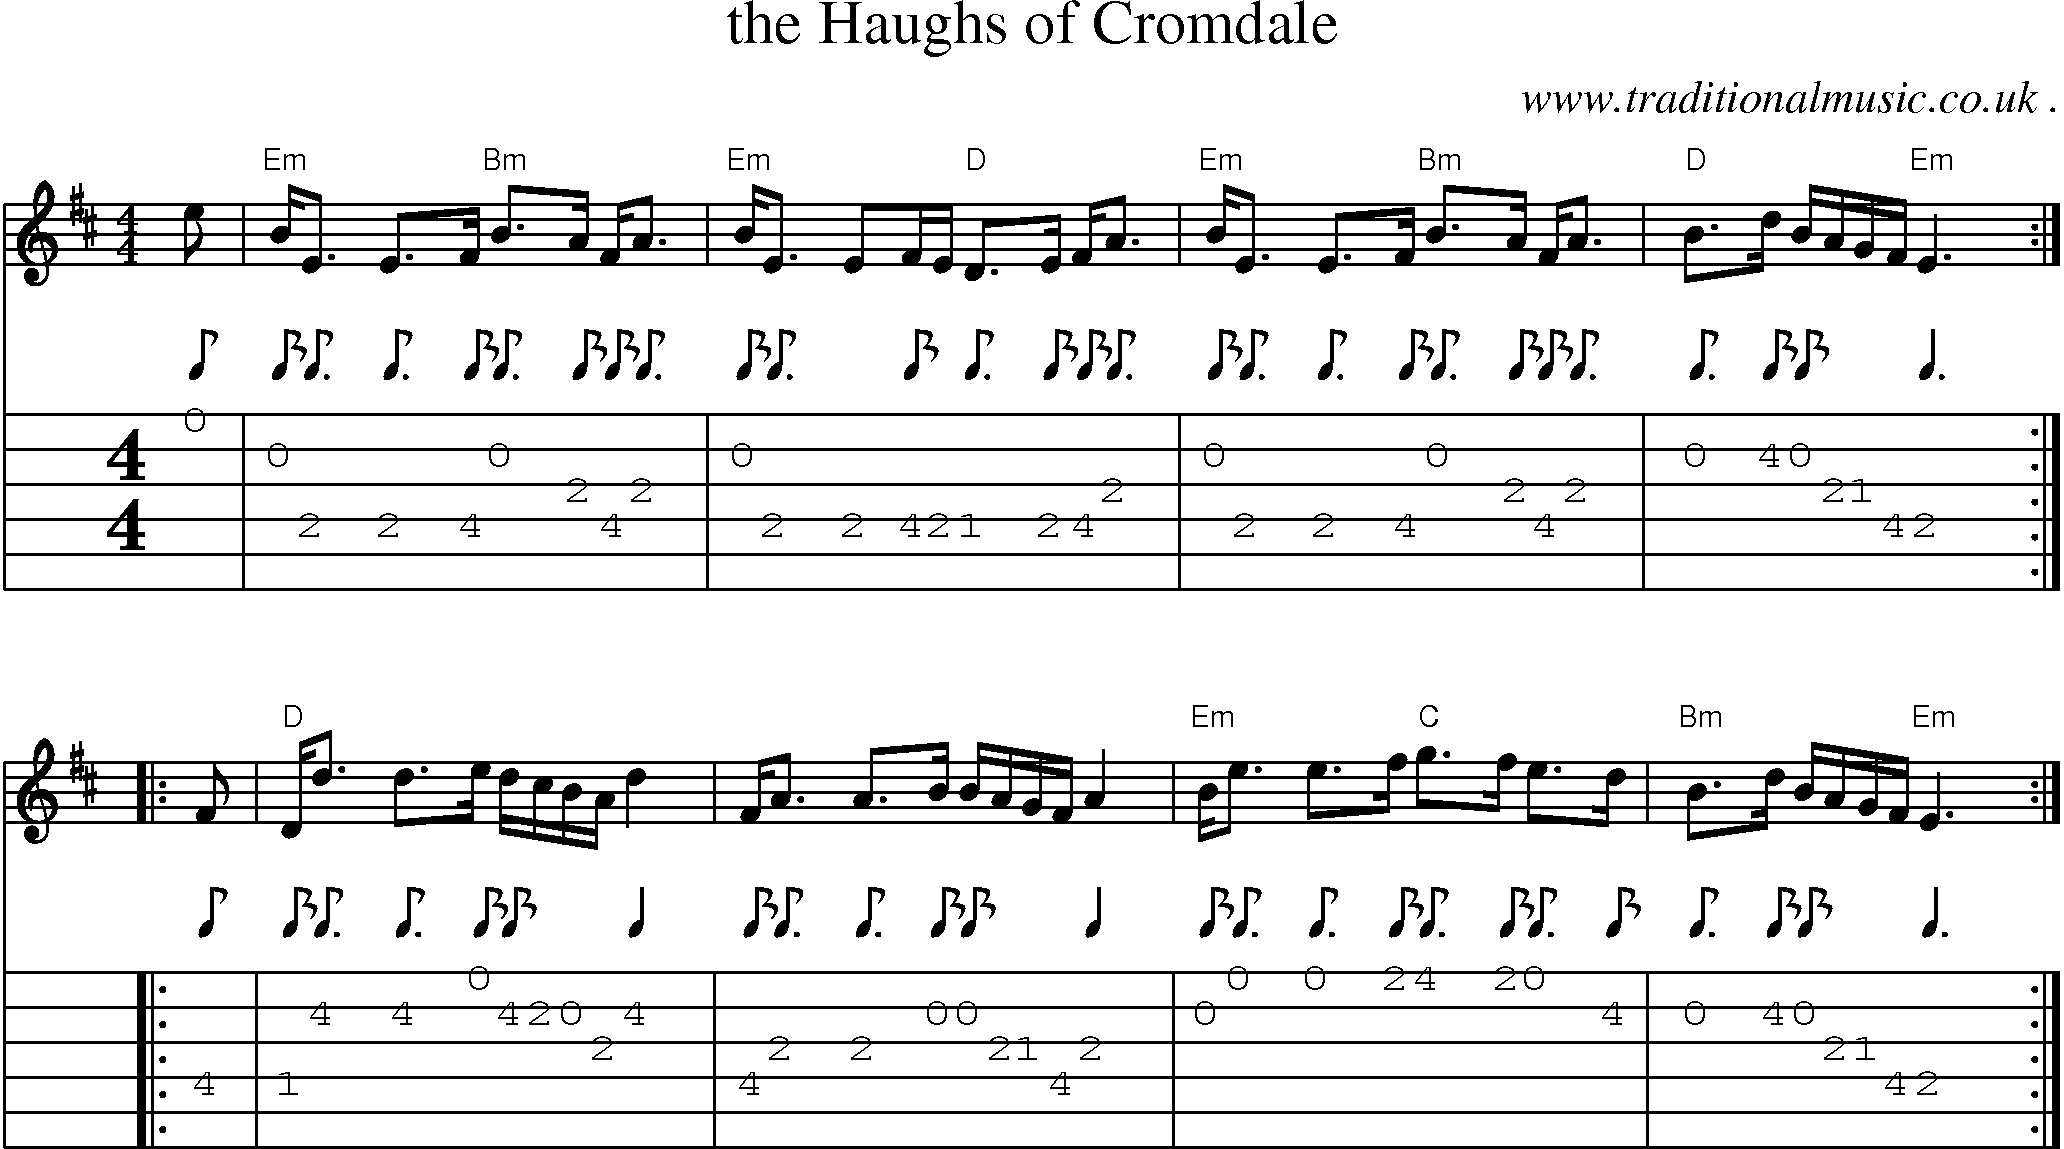 Sheet-music  score, Chords and Guitar Tabs for The Haughs Of Cromdale